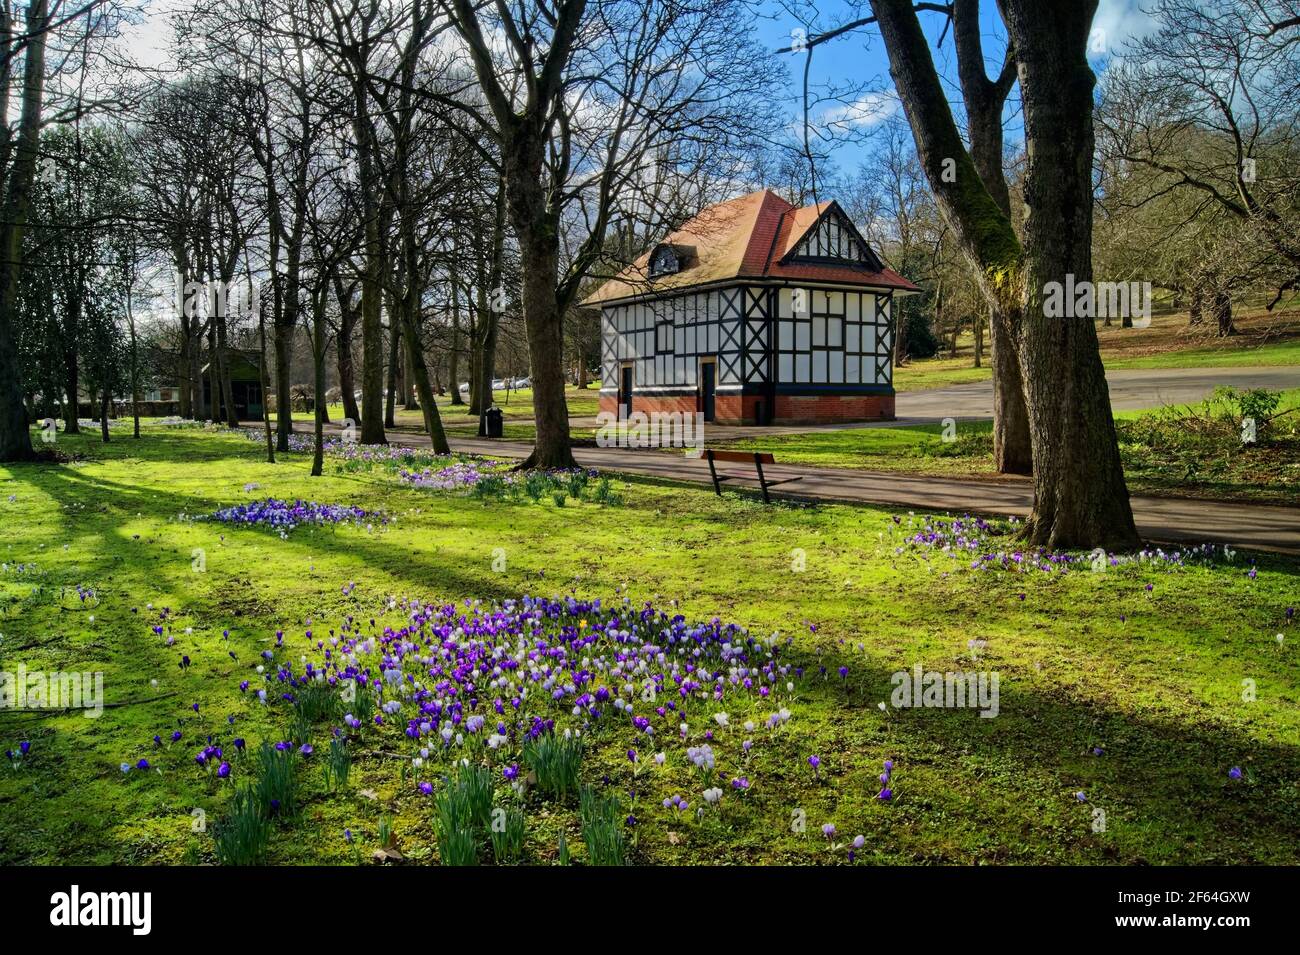 UK, West Yorkshire, Wakefield, Thornes Park Bandstand and Spring Flowers  Stock Photo - Alamy